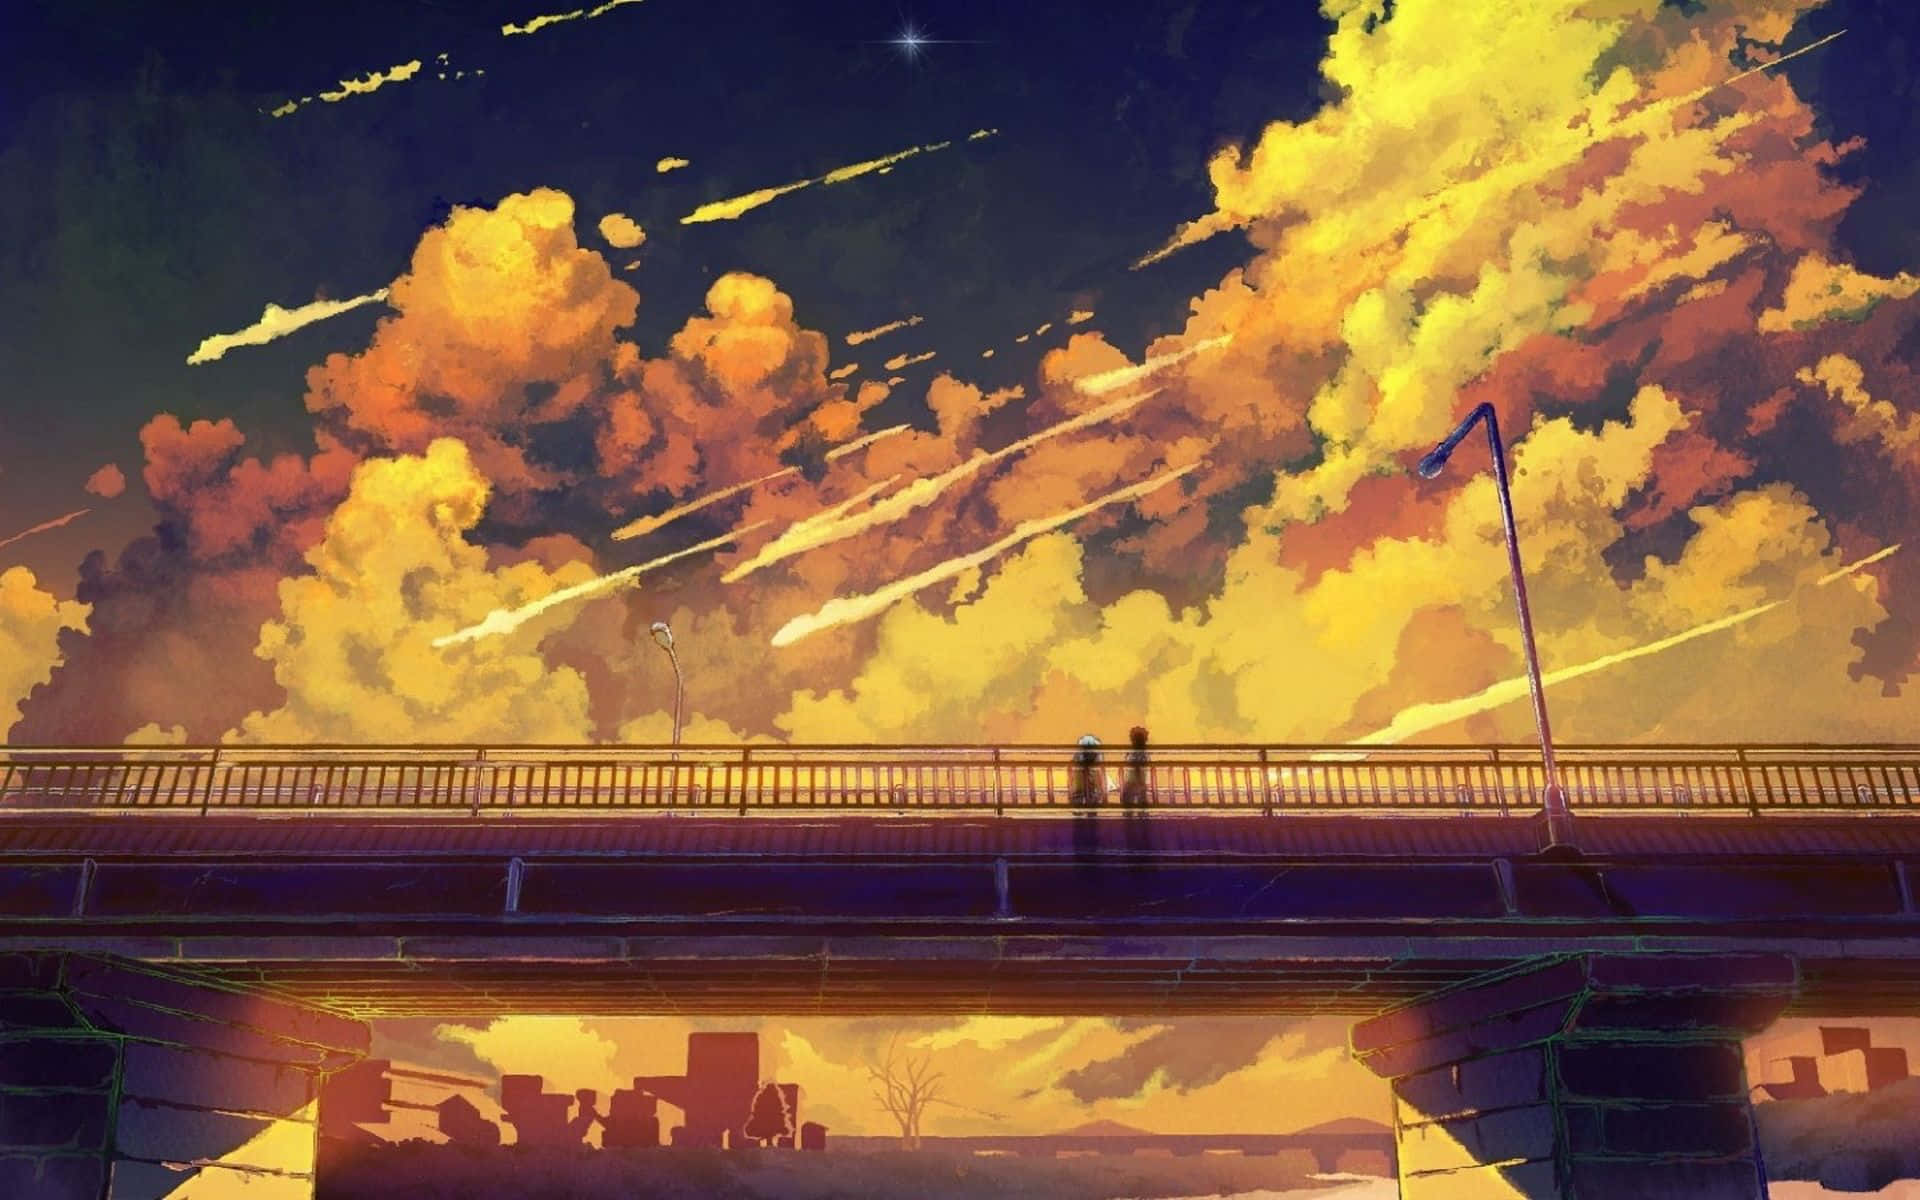 a painting of a bridge with clouds and fireworks